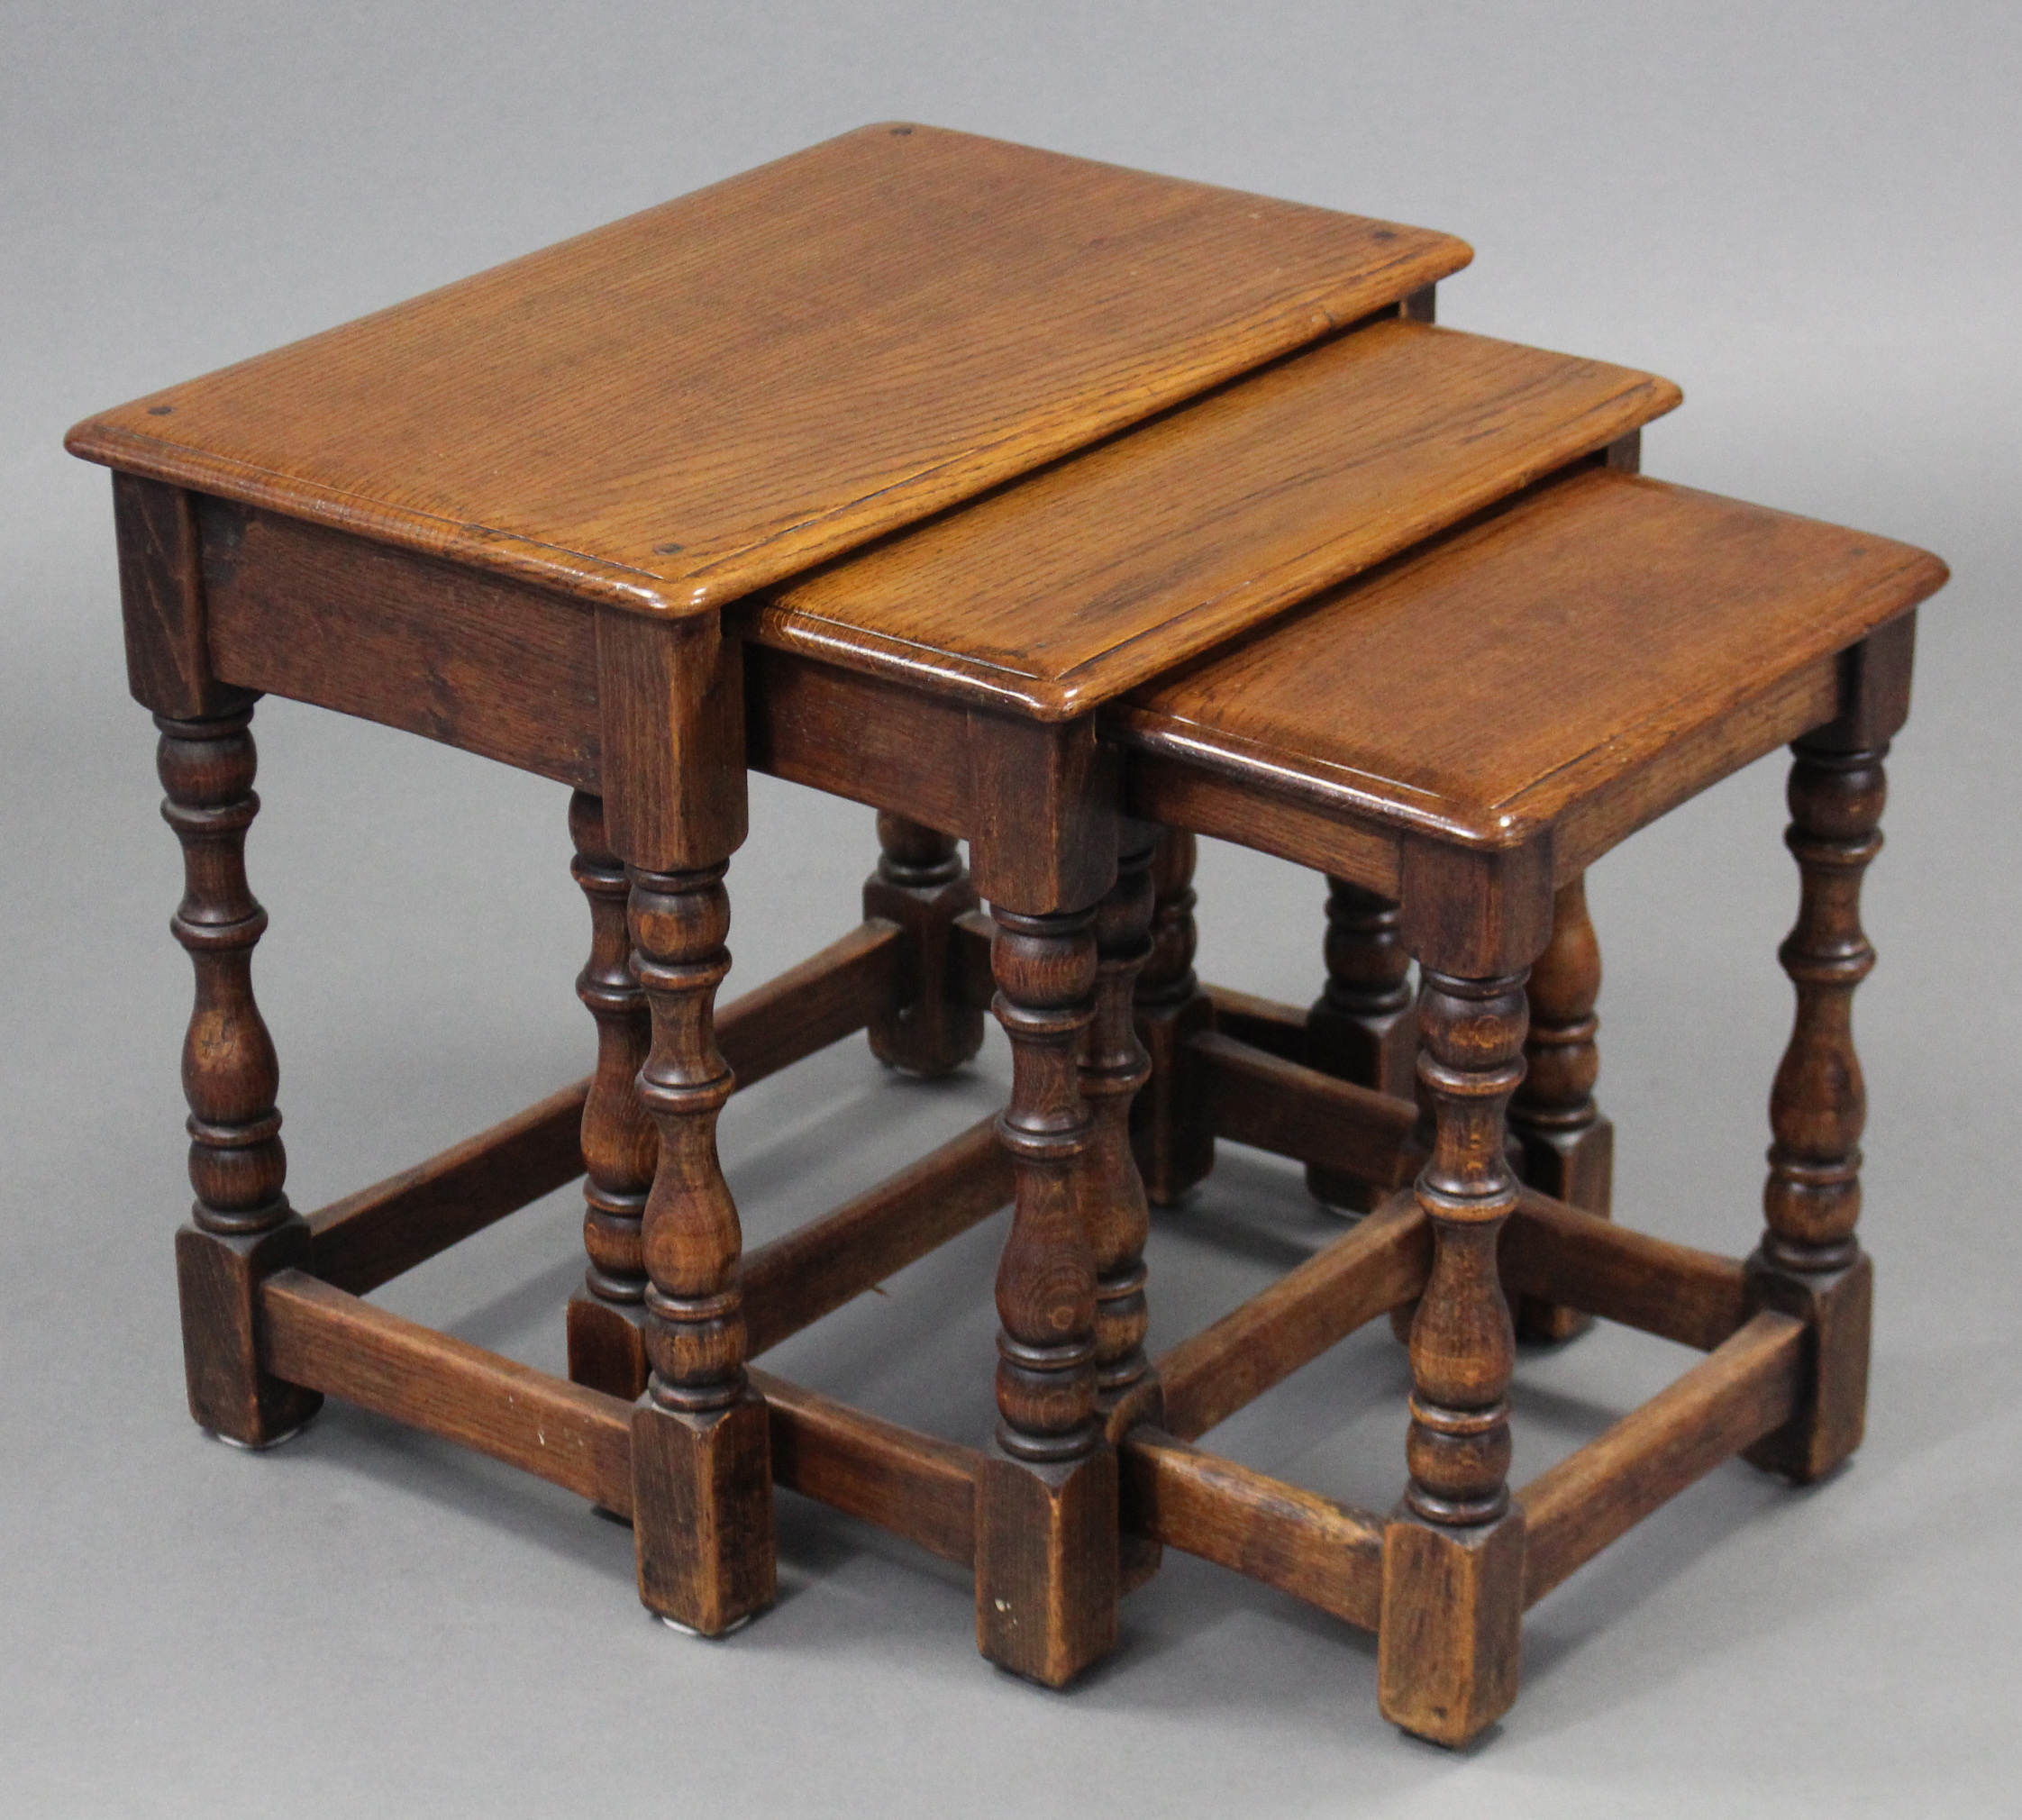 A nest of three 17th century style oak rectangular occasional tables on turned legs with plain